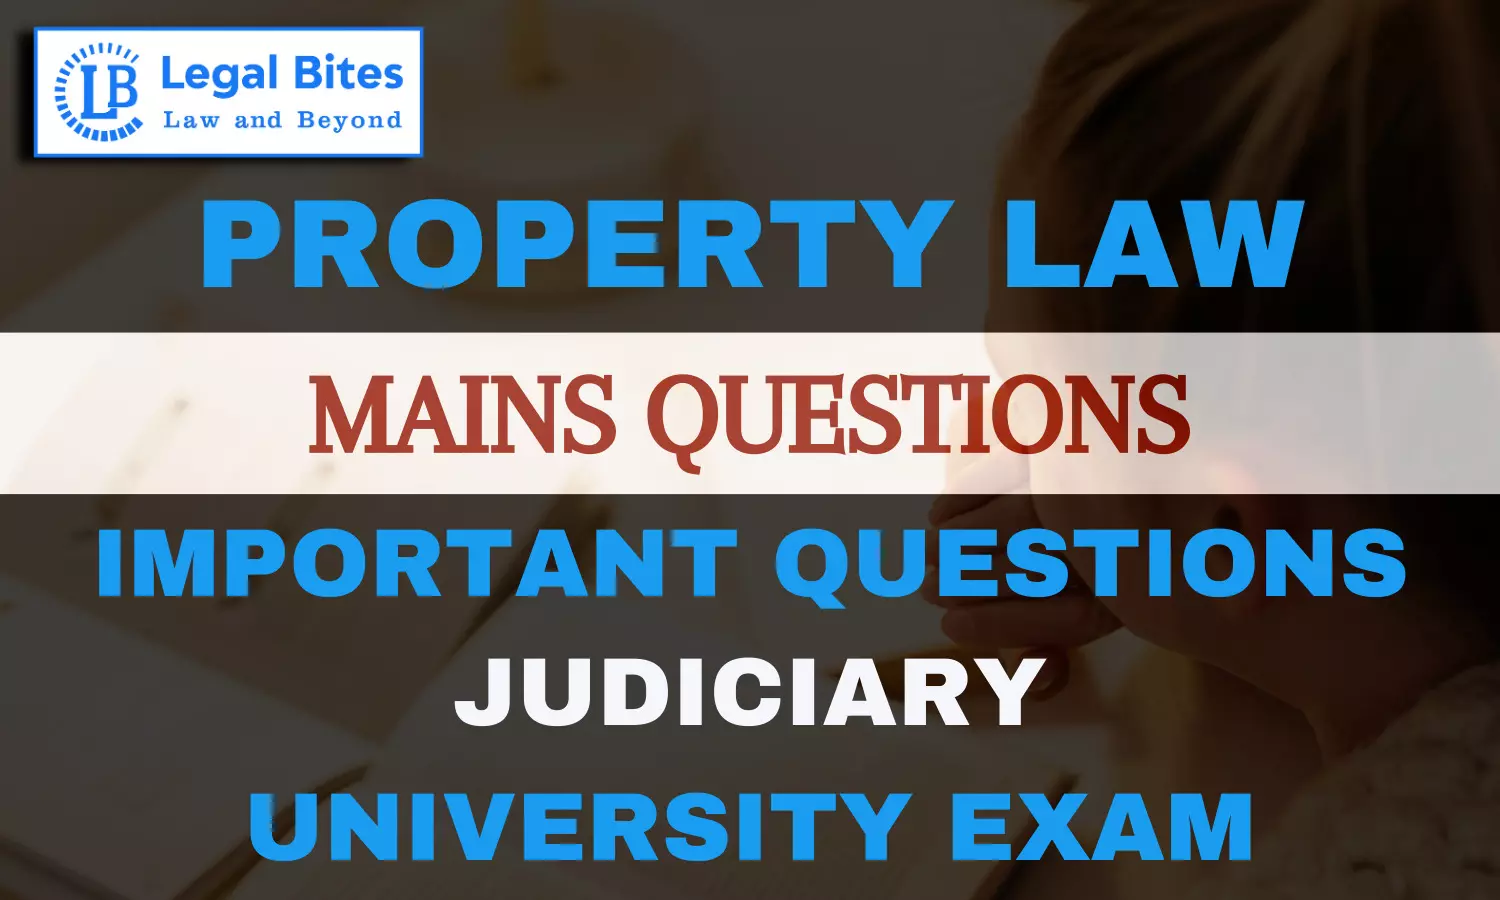 Explain the doctrine of Feeding the grant by estoppel as recognized by the Transfer of Property Act.